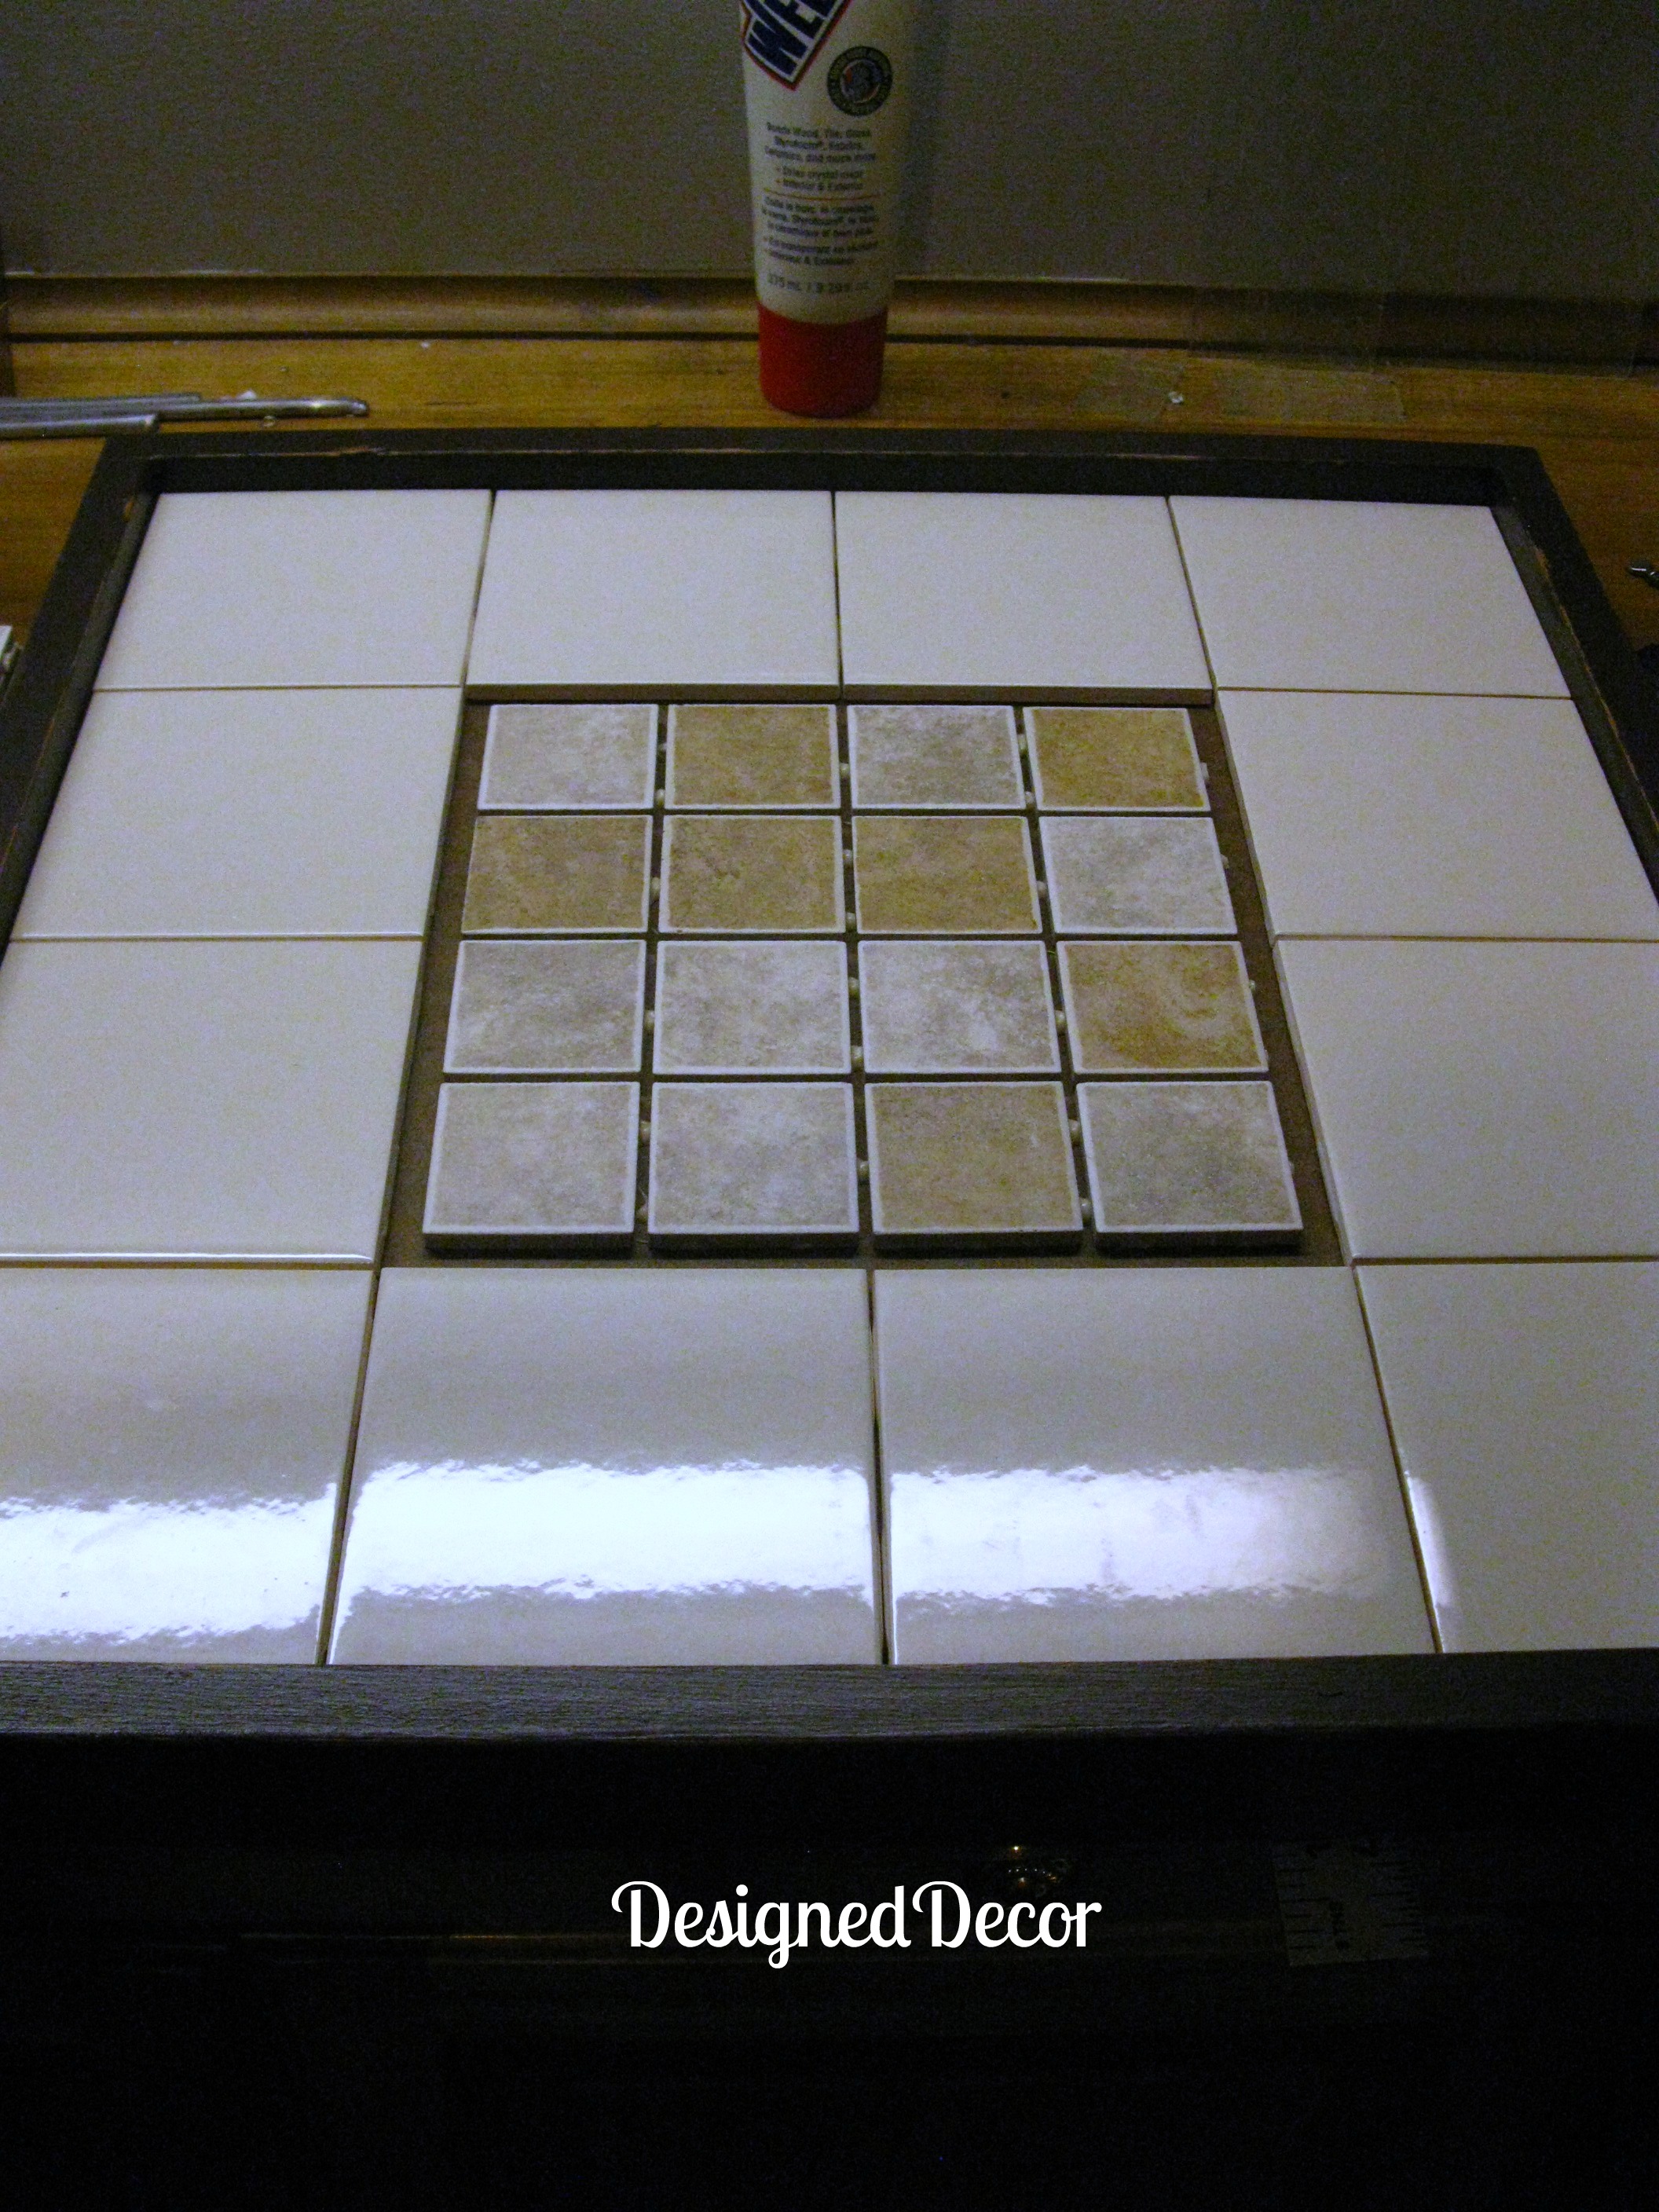 adding tile and grout to the top of the serving tray table